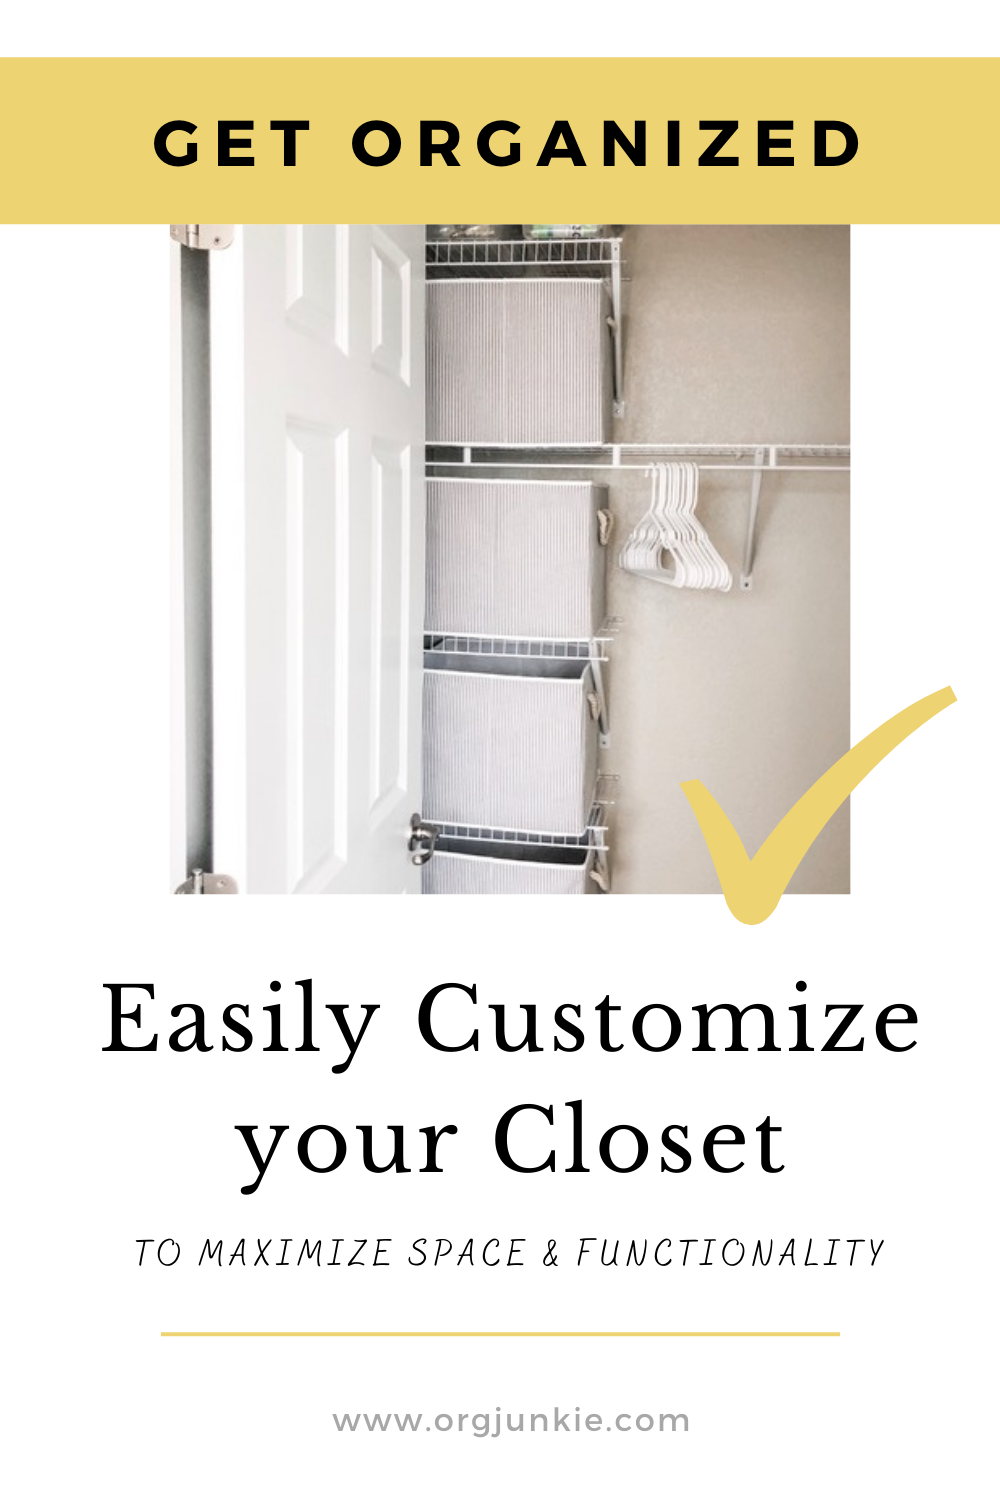 Three Tips to Easily Customize Your Closet to Maximize Space at I'm an Organizing Junkie blog